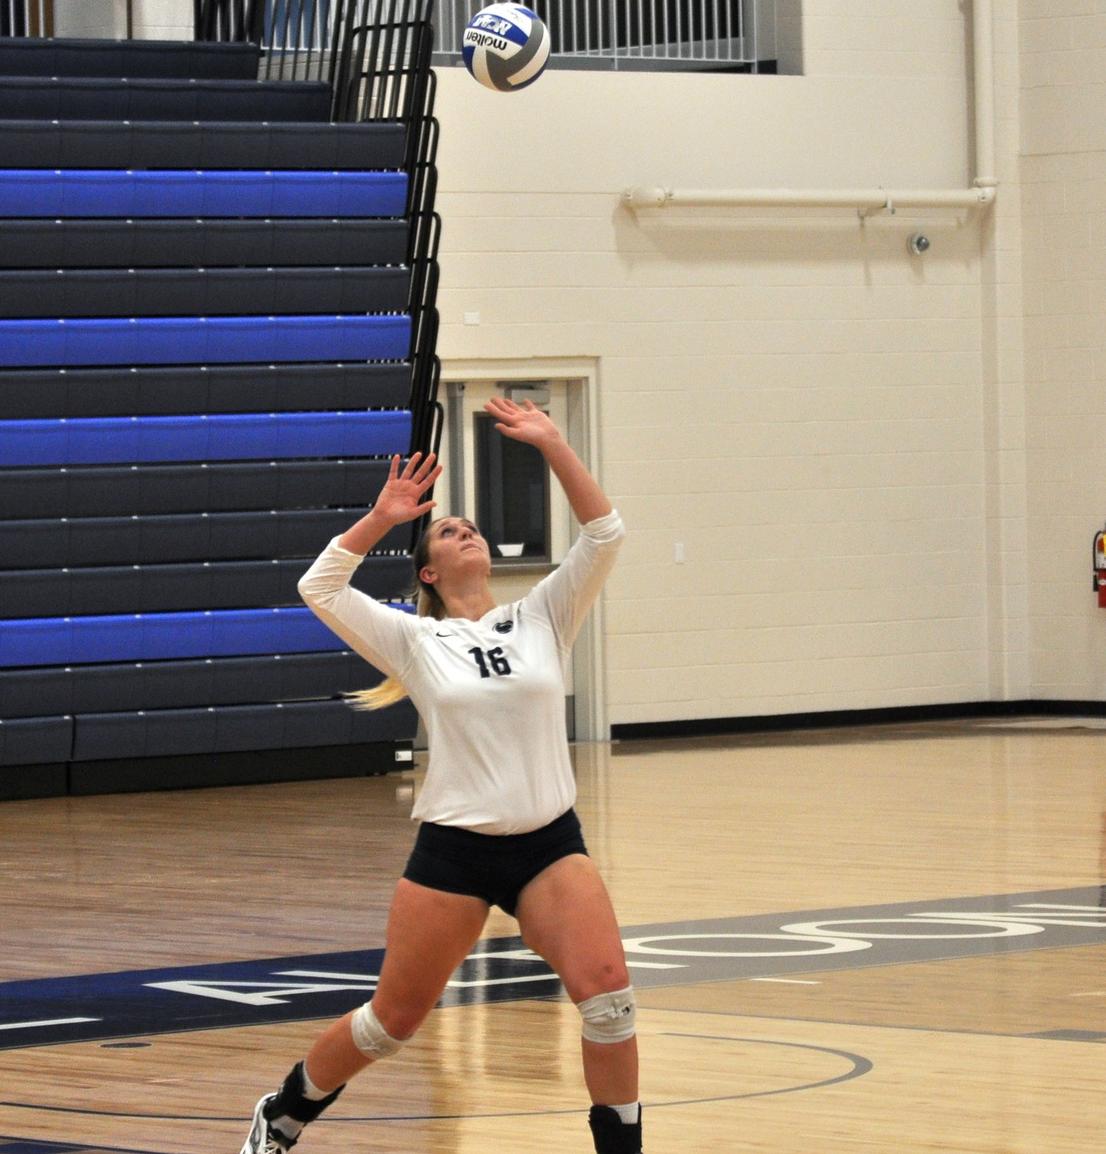 Photo: Penn State Altoona sophomore outside hitter Lauren Diller had a team-high seven kills to go along with one solo block and one block assist in Wednesday's loss at La Roche College.